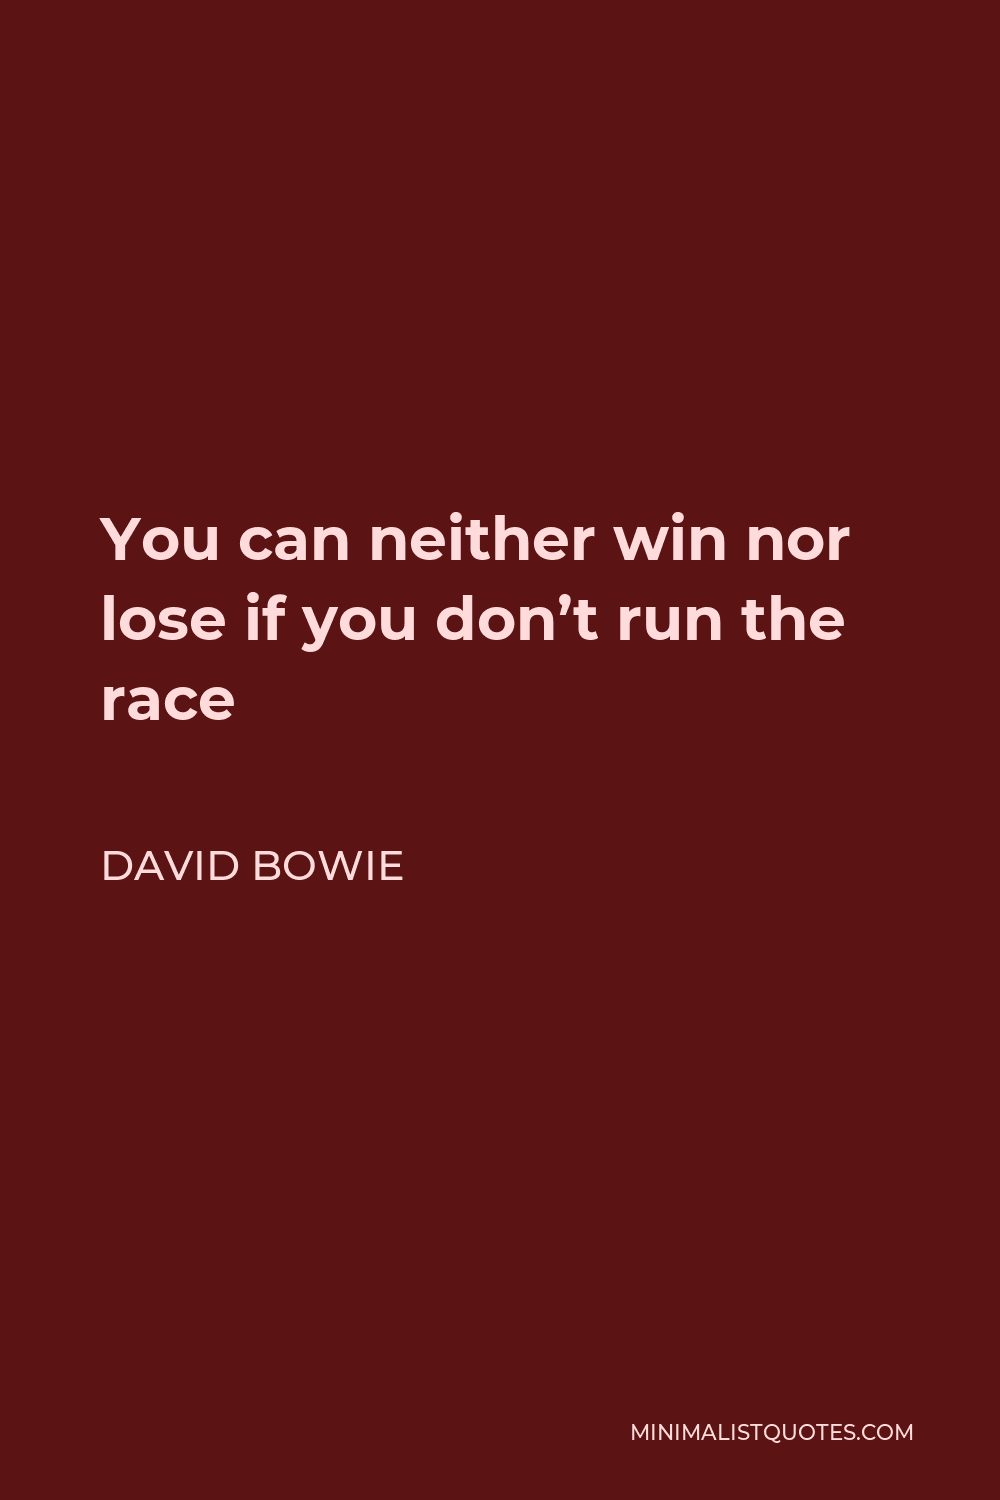 David Bowie Quote - You can neither win nor lose if you don’t run the race